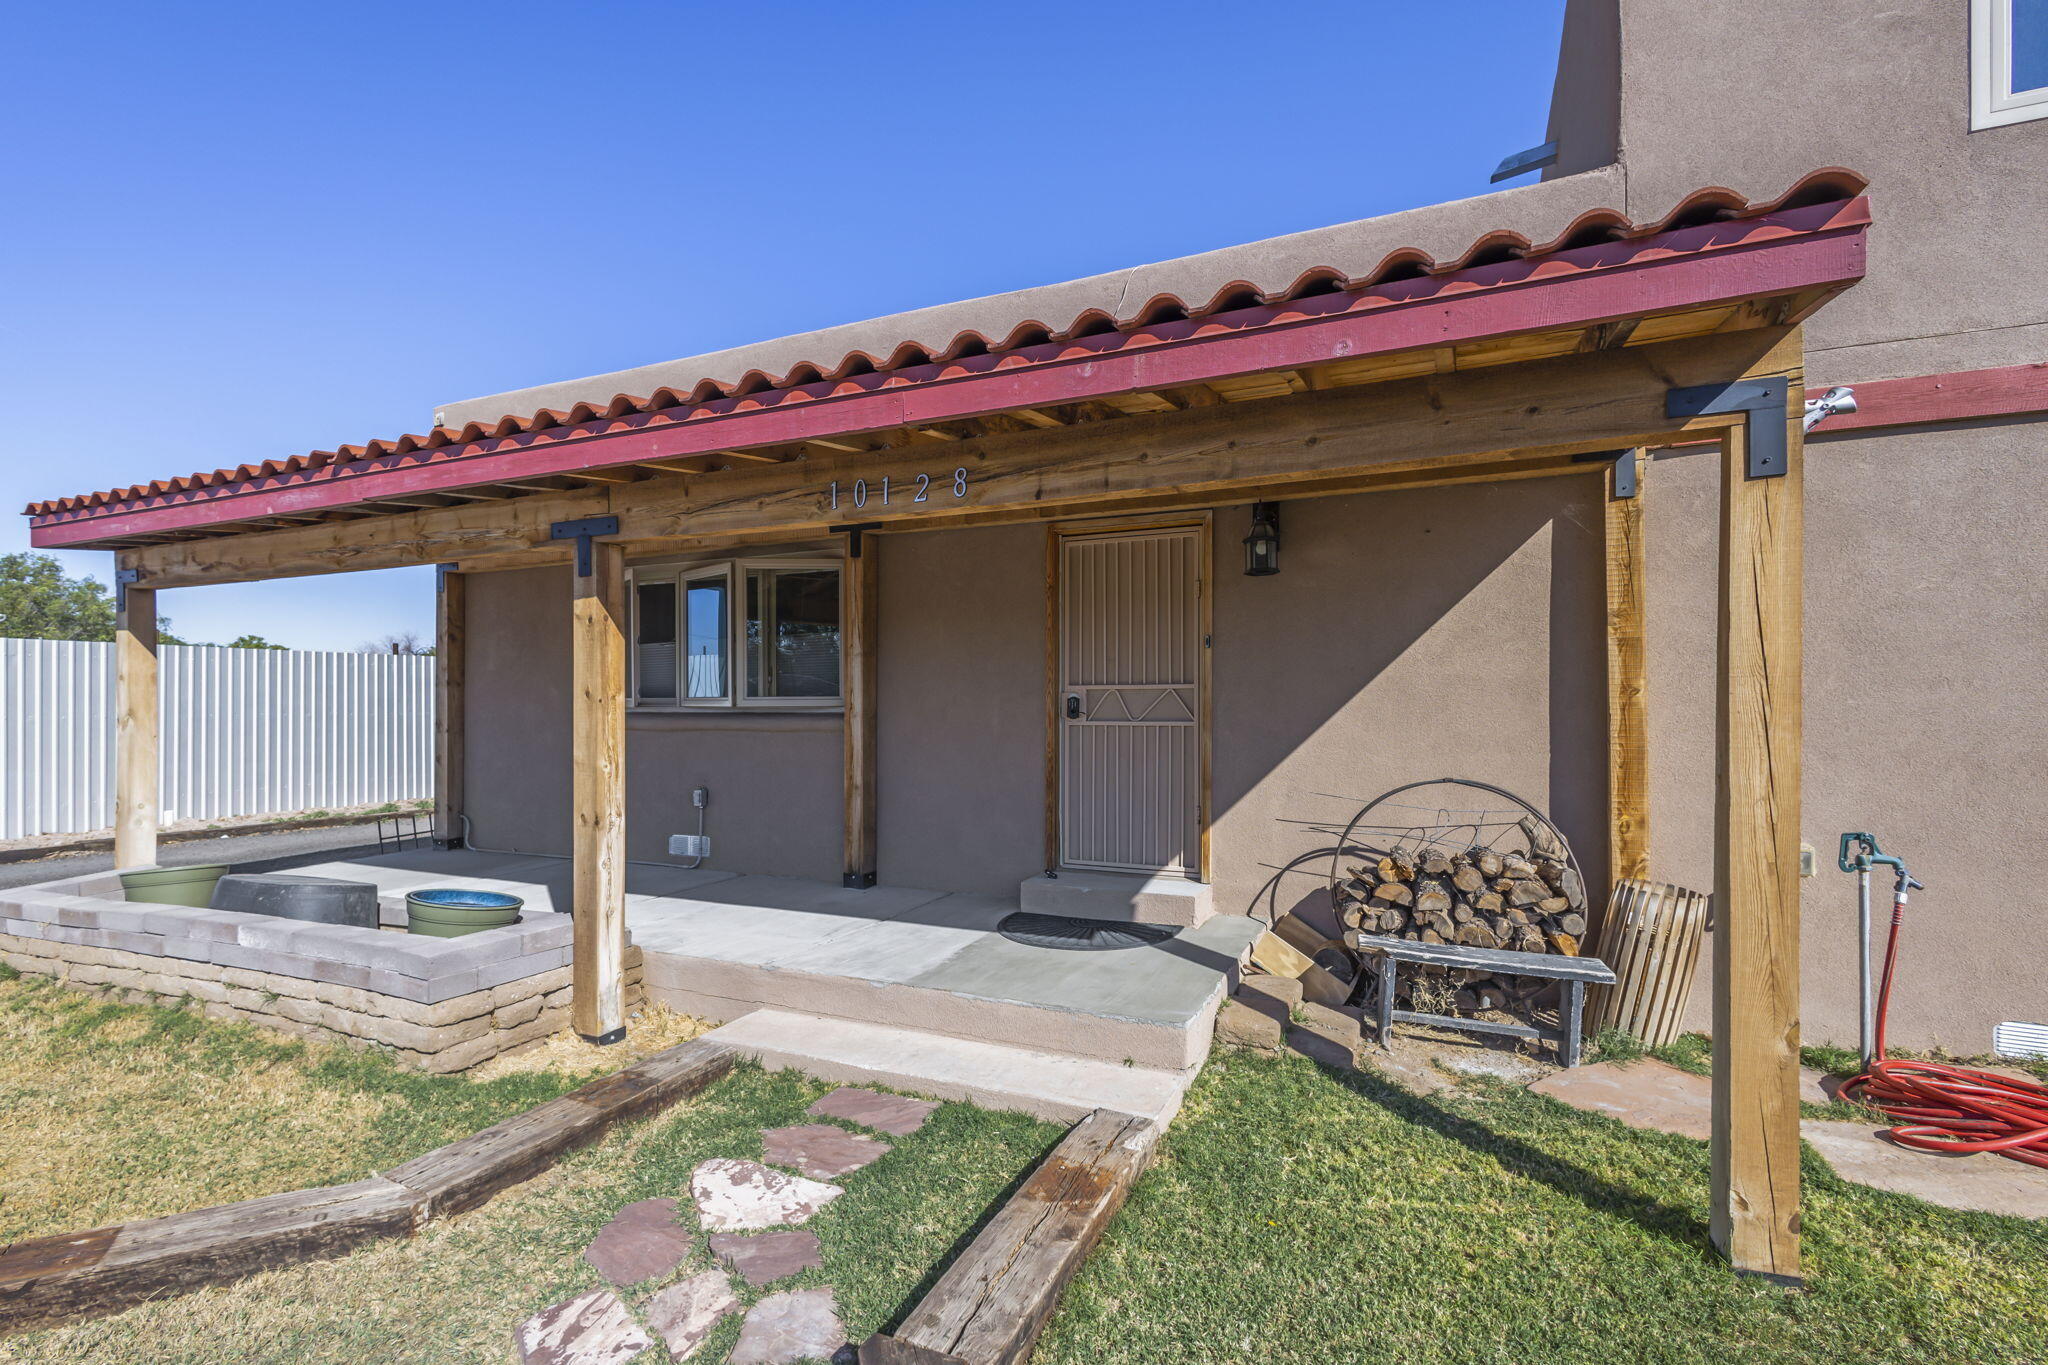 10128 N 2nd Street NW, Albuquerque, New Mexico 87114, 4 Bedrooms Bedrooms, ,3 BathroomsBathrooms,Residential,For Sale,10128 N 2nd Street NW,1058316